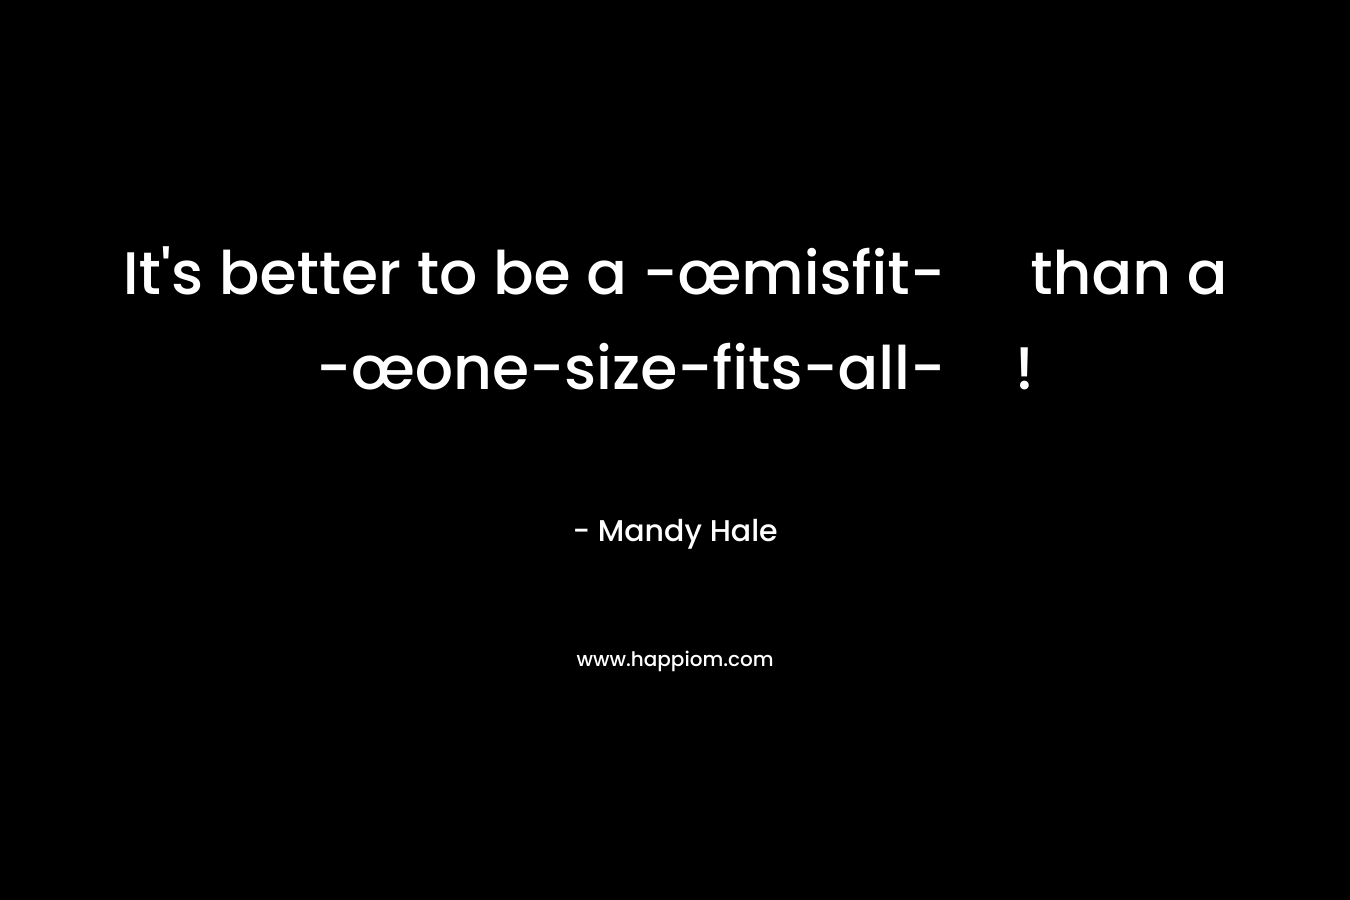 It's better to be a -œmisfit- than a -œone-size-fits-all-!